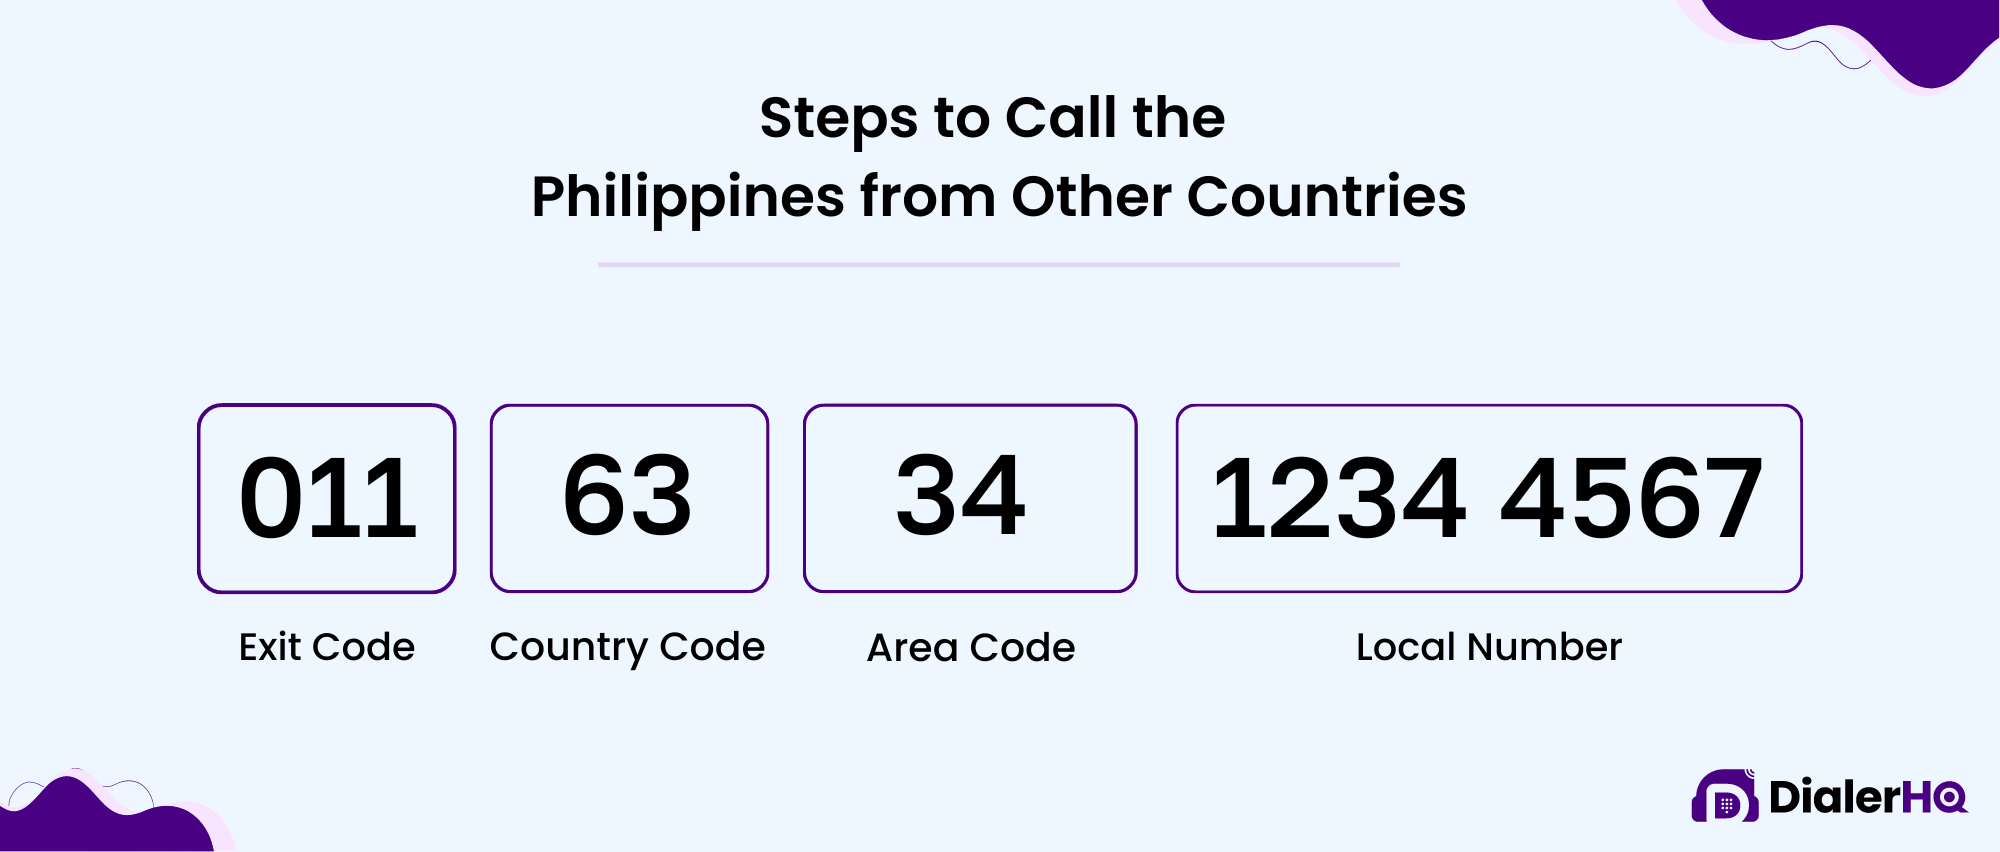 Steps to Call the Philippines from Other Countries